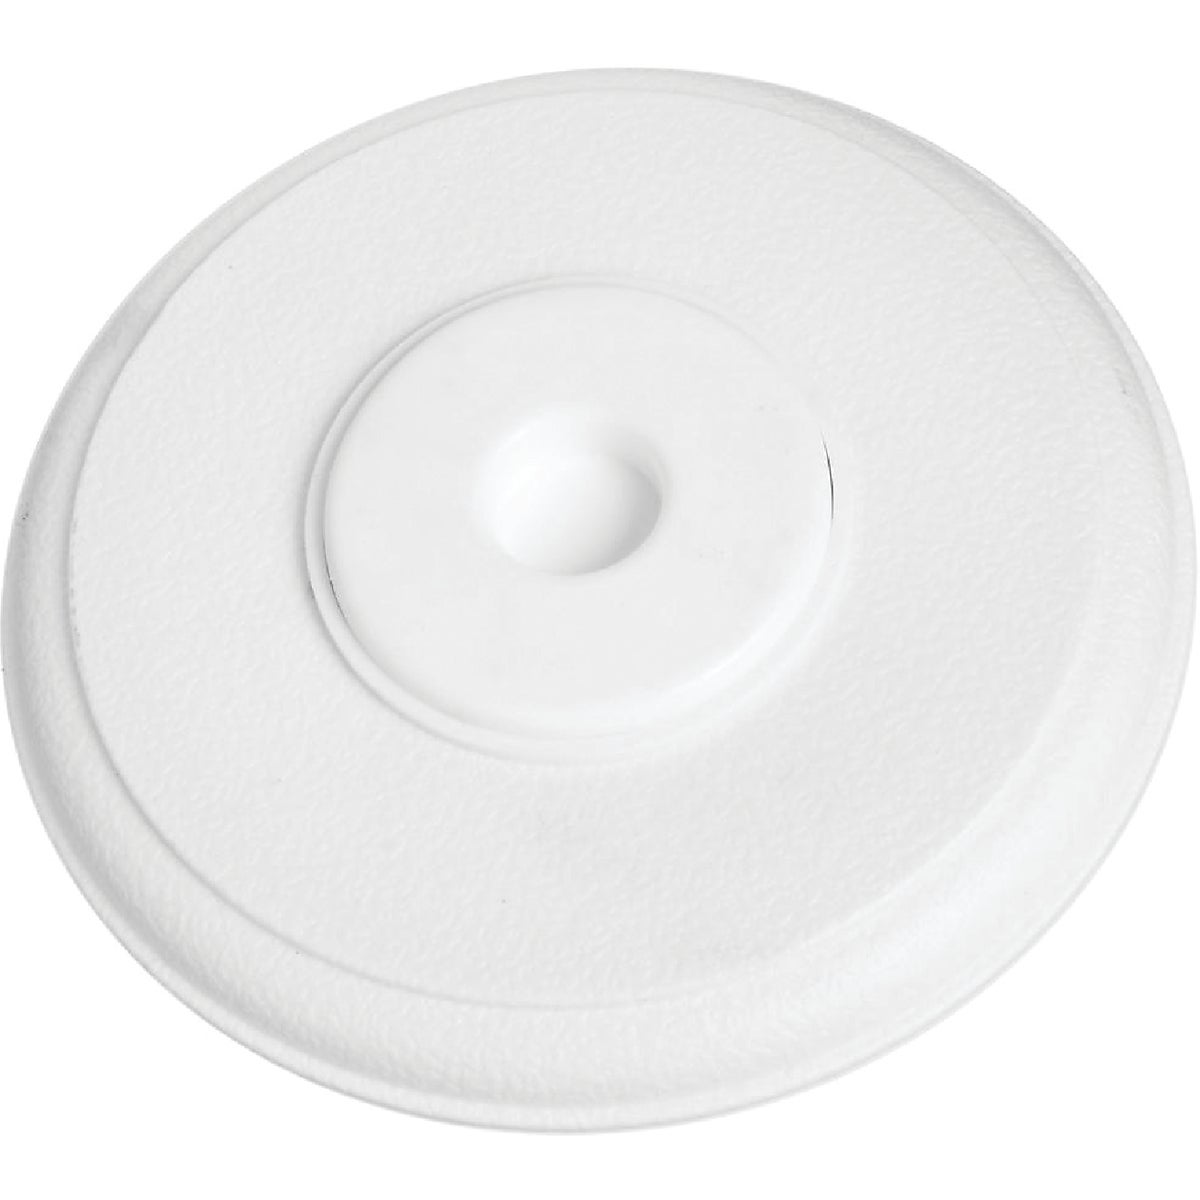 National 336 5 In. White Softstop Cover-Up Wall Door Stop